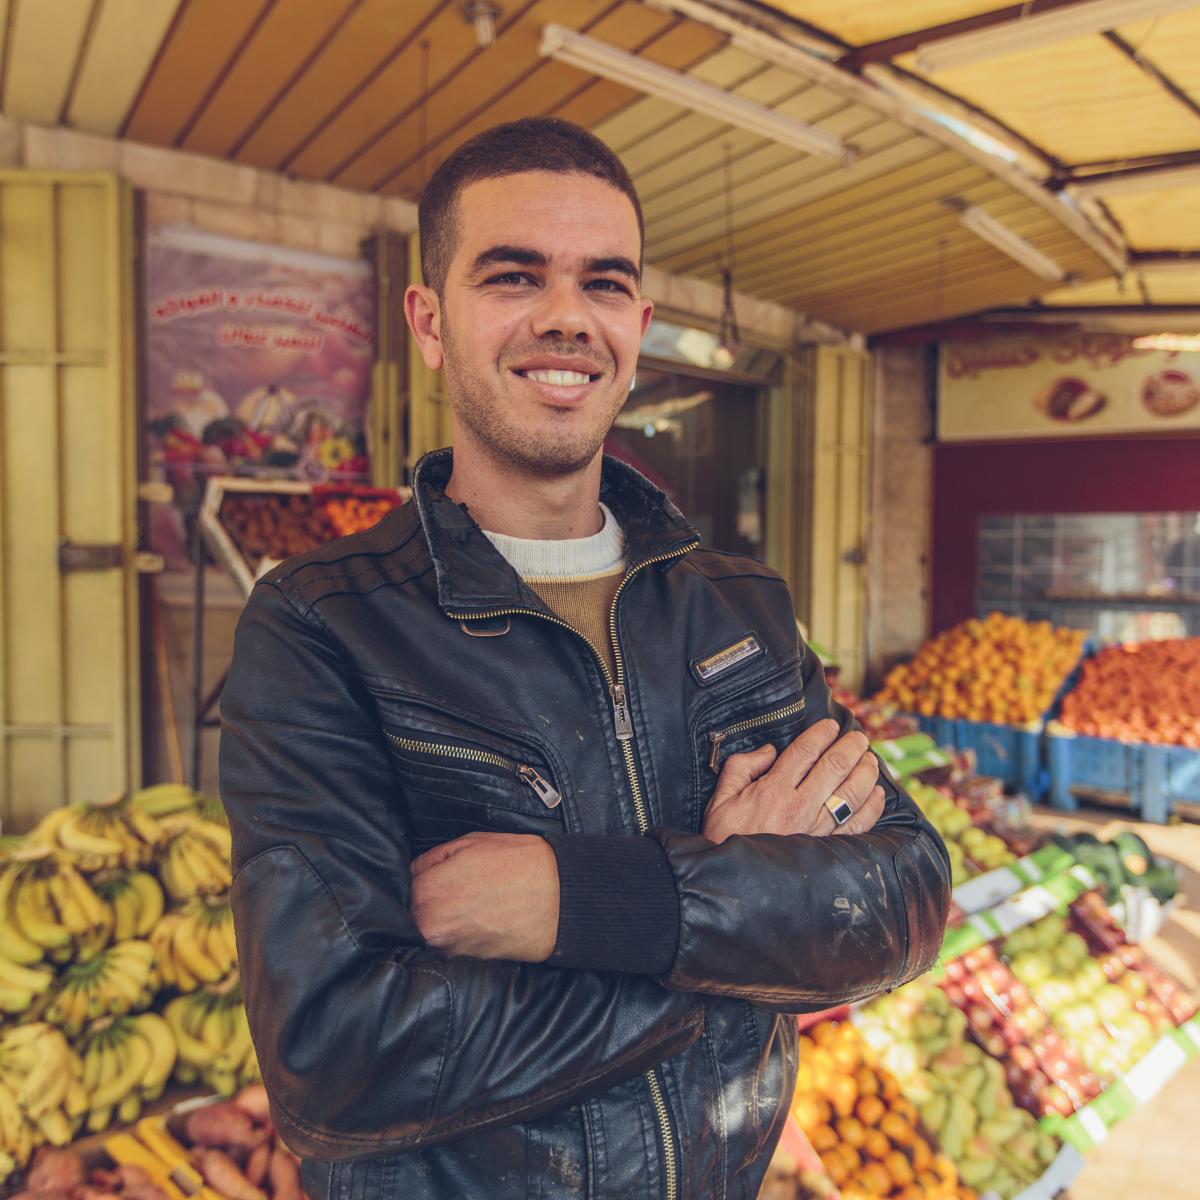 Smiling man with crossed arms in front of a fruit stand.